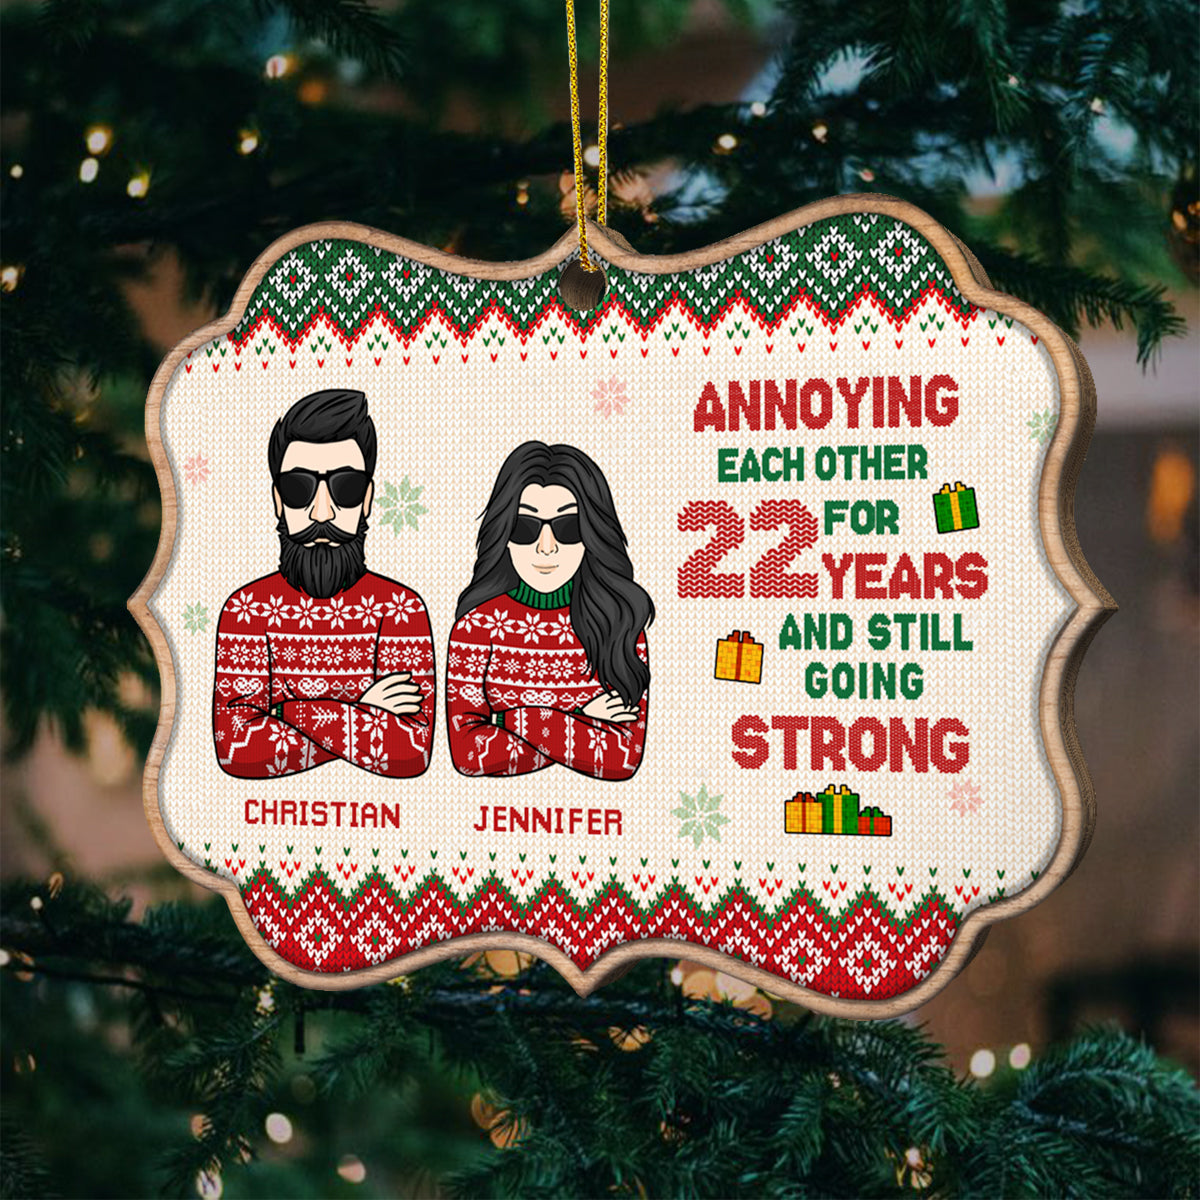 I Survived Many Years With Him And Nothing Can Scare Me - Gift For Couples, Husband Wife, Personalized Shaped Ornament